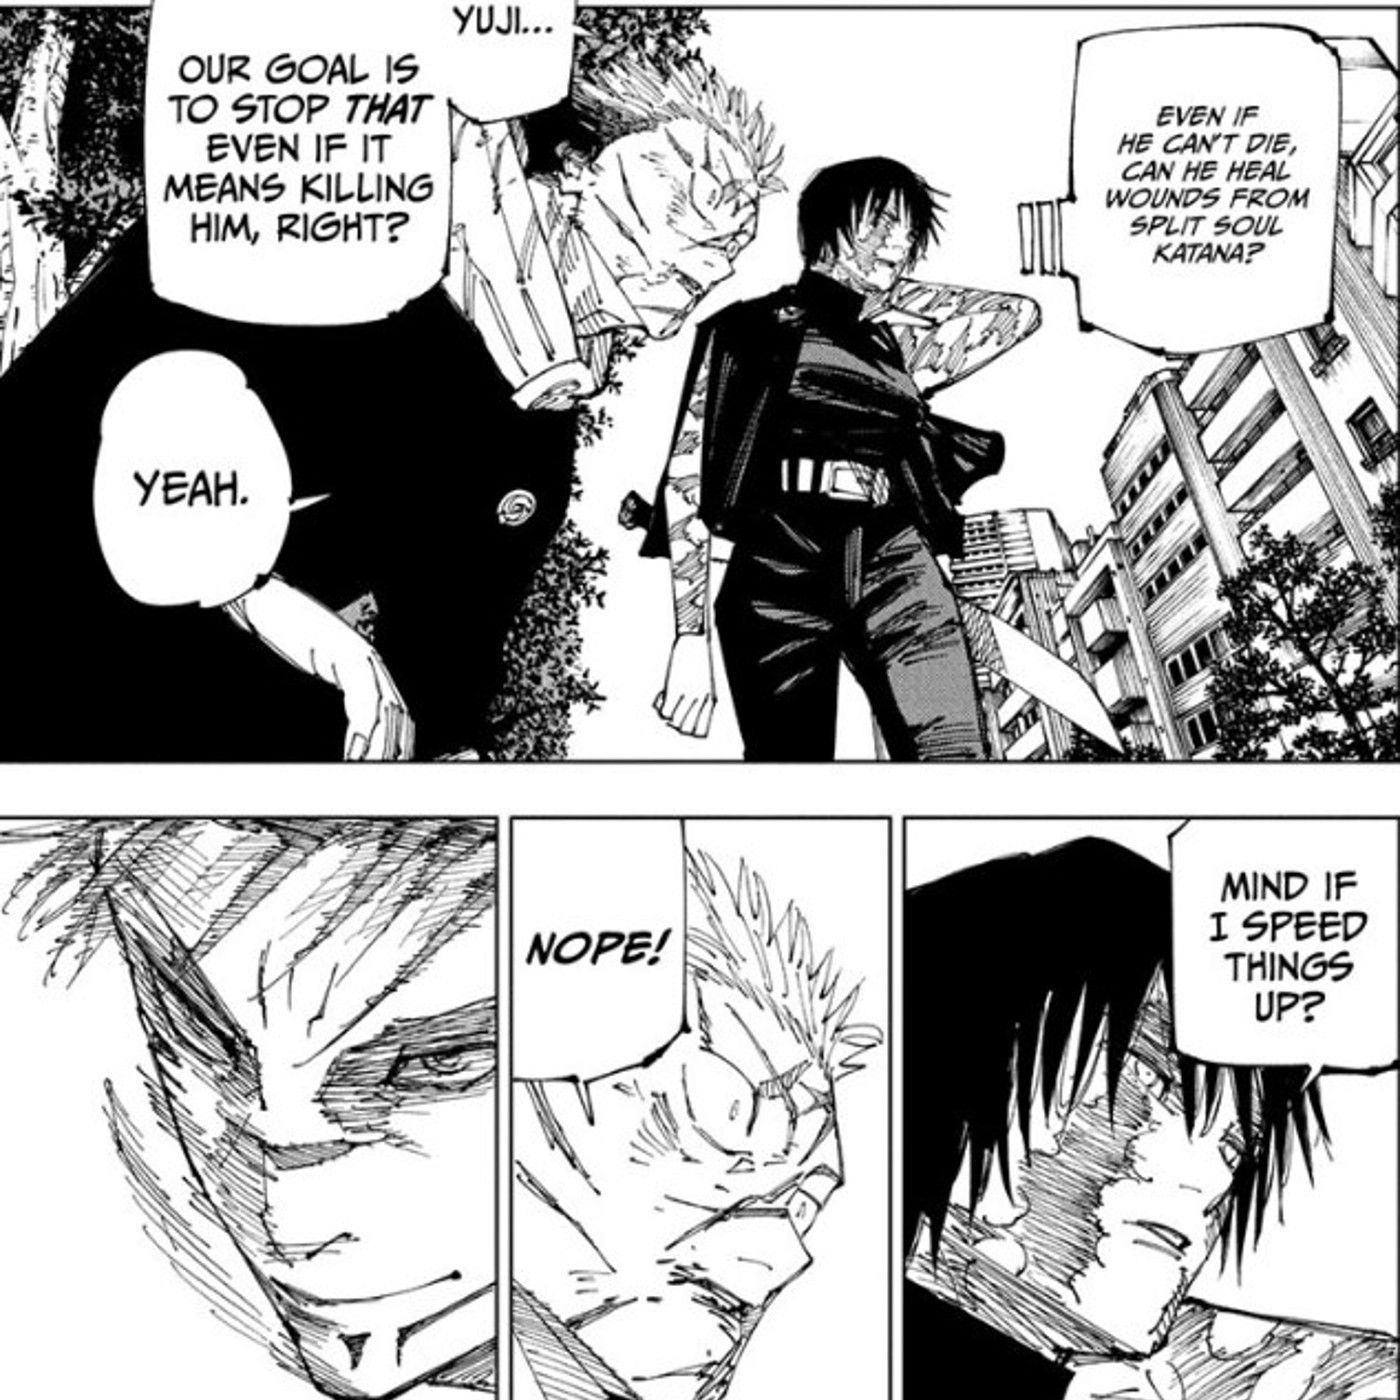 Jujutsu Kaisen’s Yuji is Unique Because He’s Willing to Kill His Friends